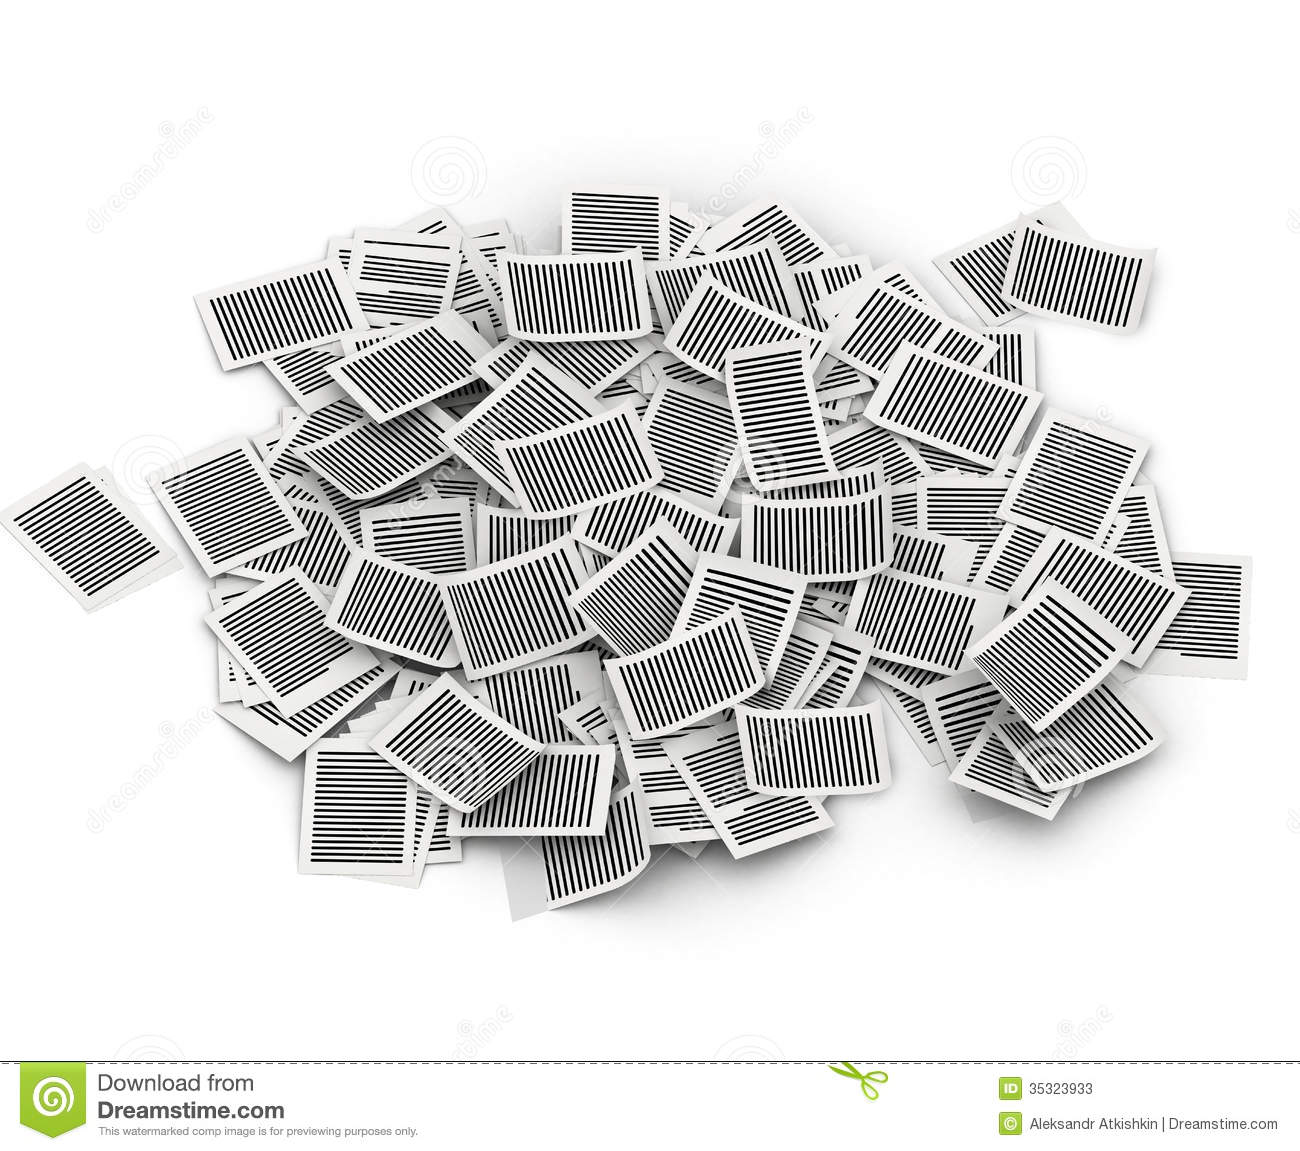 Big Pile Of Paper Pages Lay In White Background